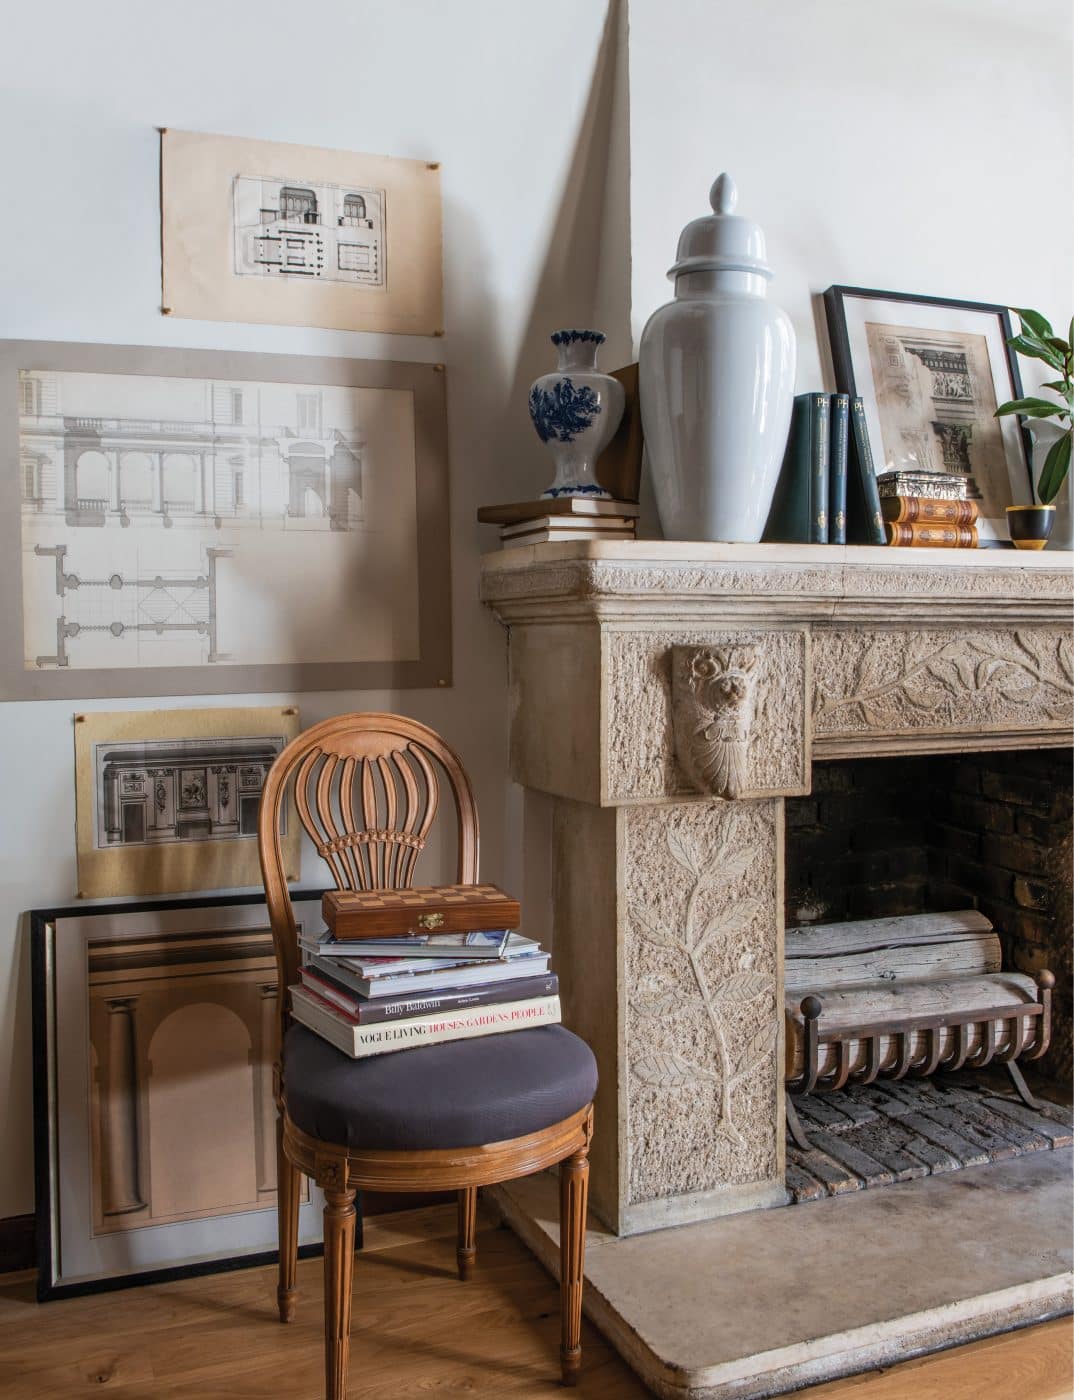 Interior designer David Jimenez atelier design studio on Paris's Île Saint-Louis from his book Parisian By Design published by Rizzoli fireplace and Montgolfier balloon-back chair 